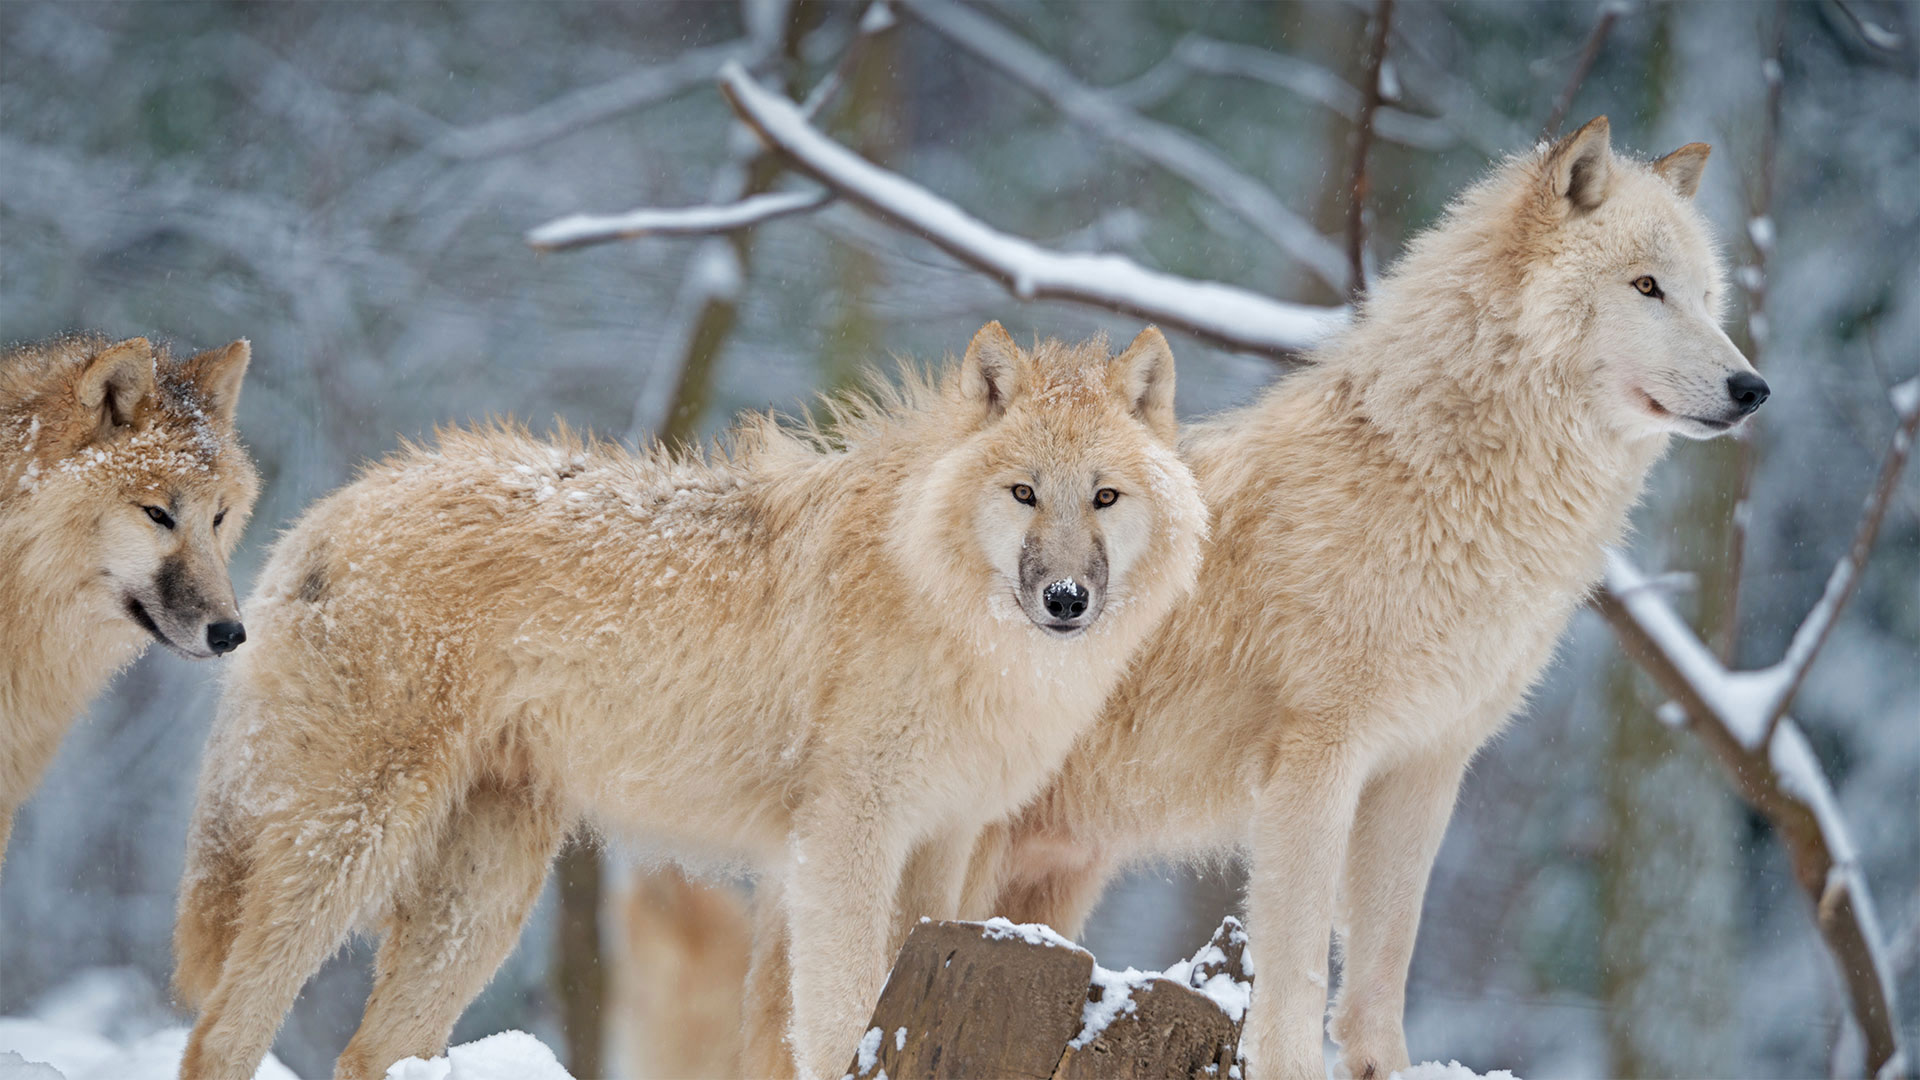 Arctic wolf family in Canada - 4FR/Getty Images)